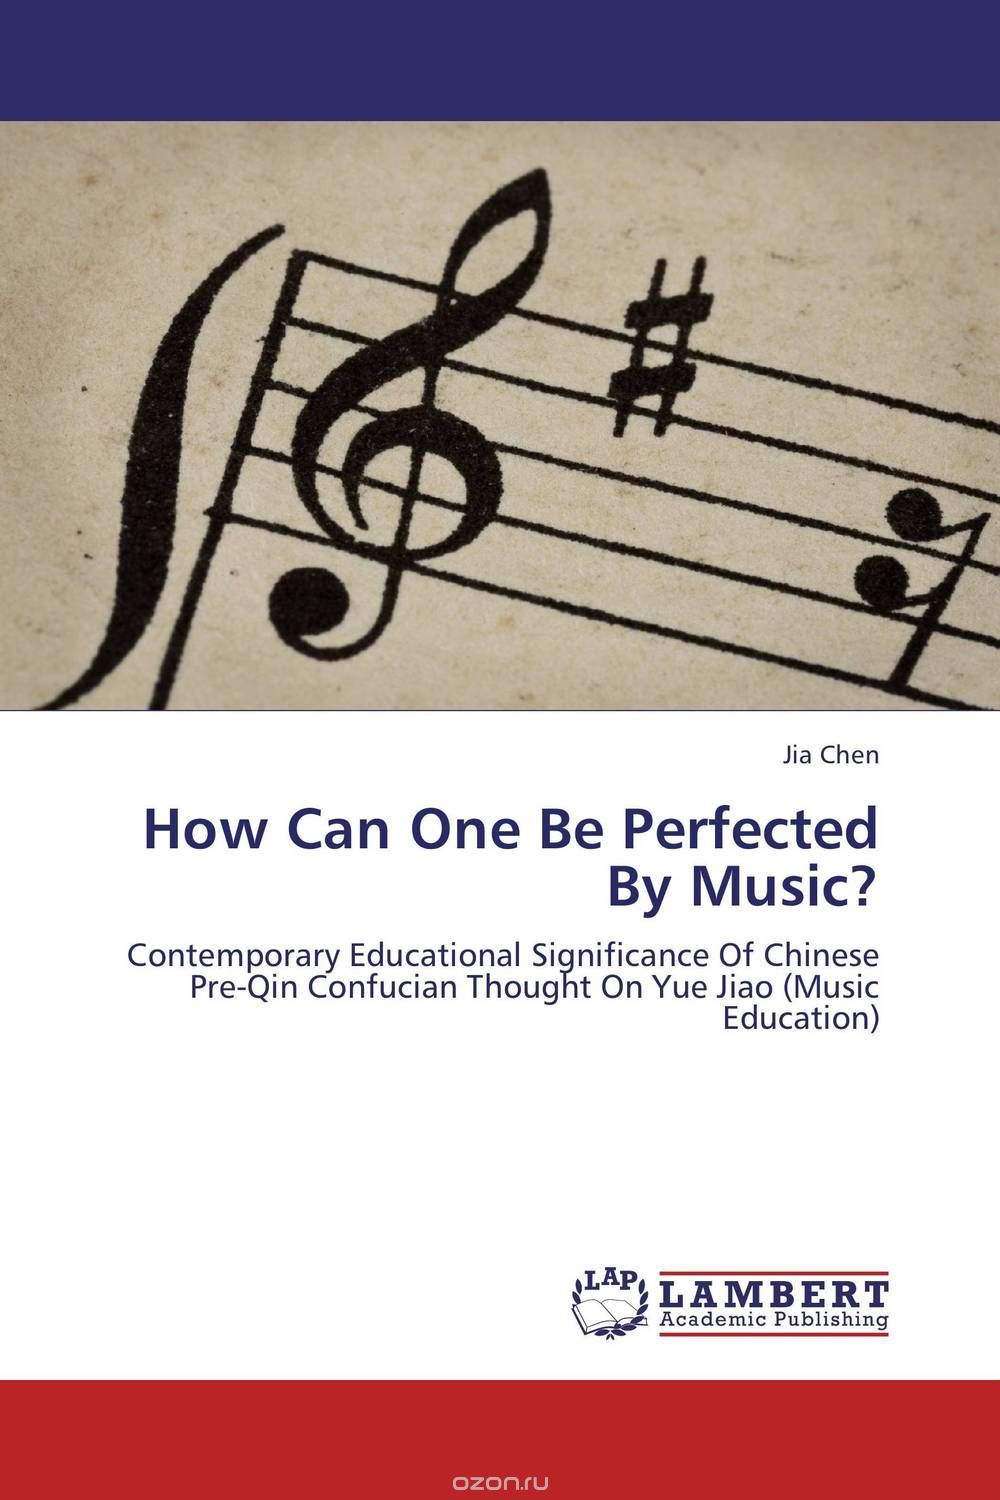 Скачать книгу "How Can One Be Perfected By Music?"